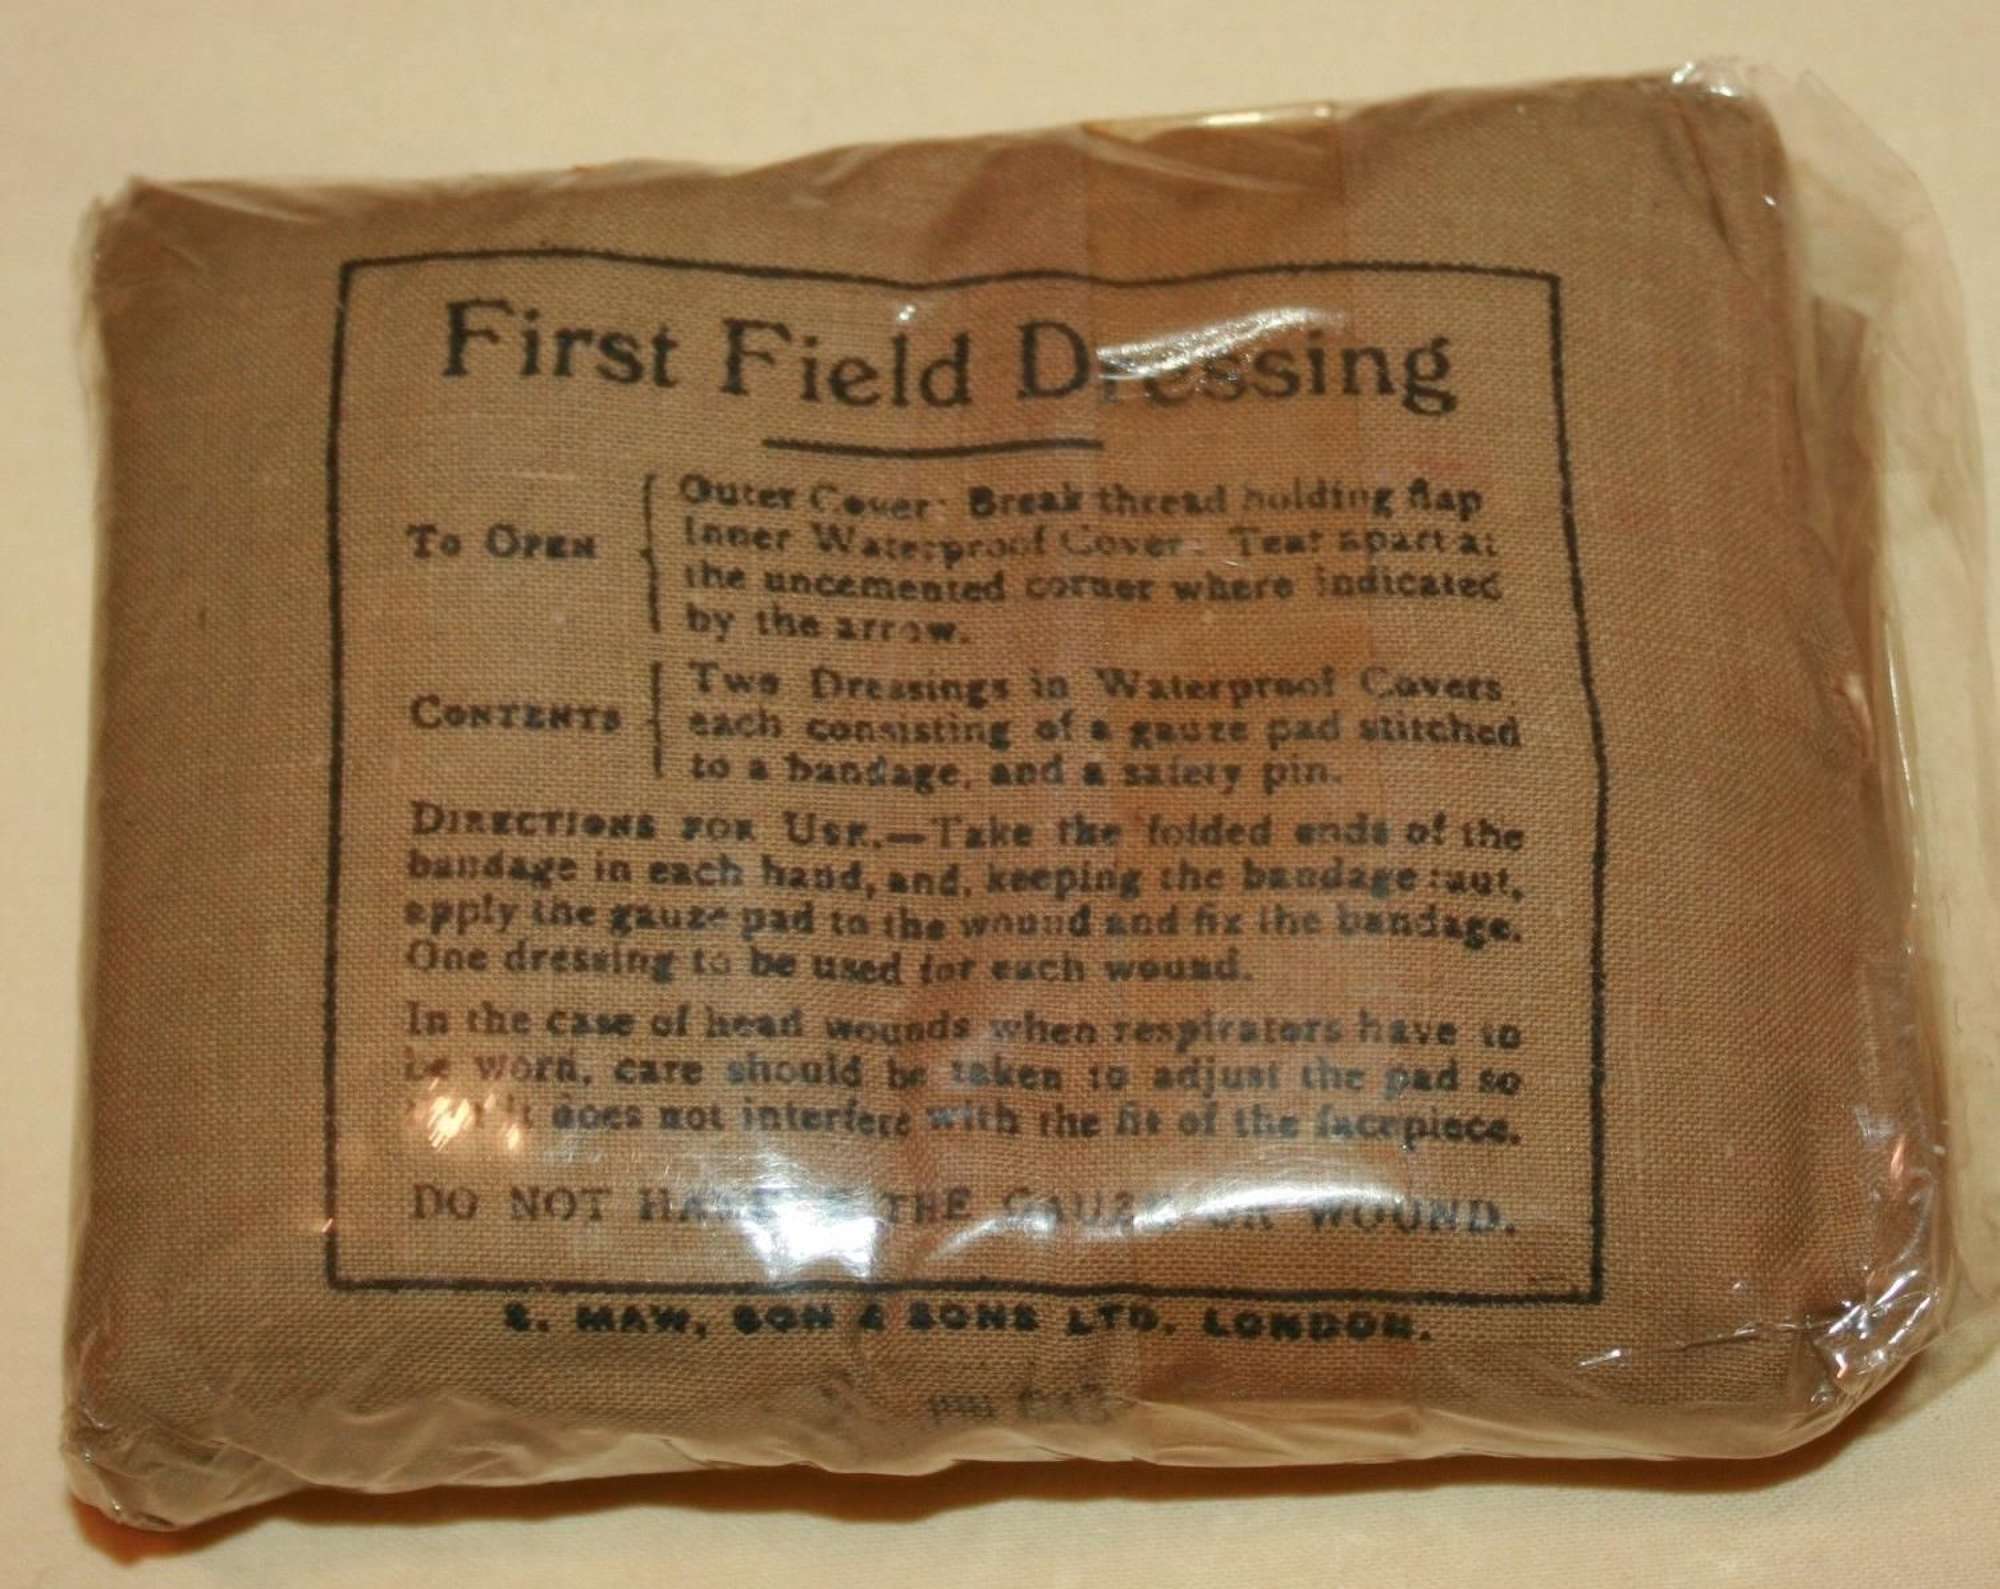 A 1943 DATED 1ST FIELD DRESSING IN CELLOPHANE